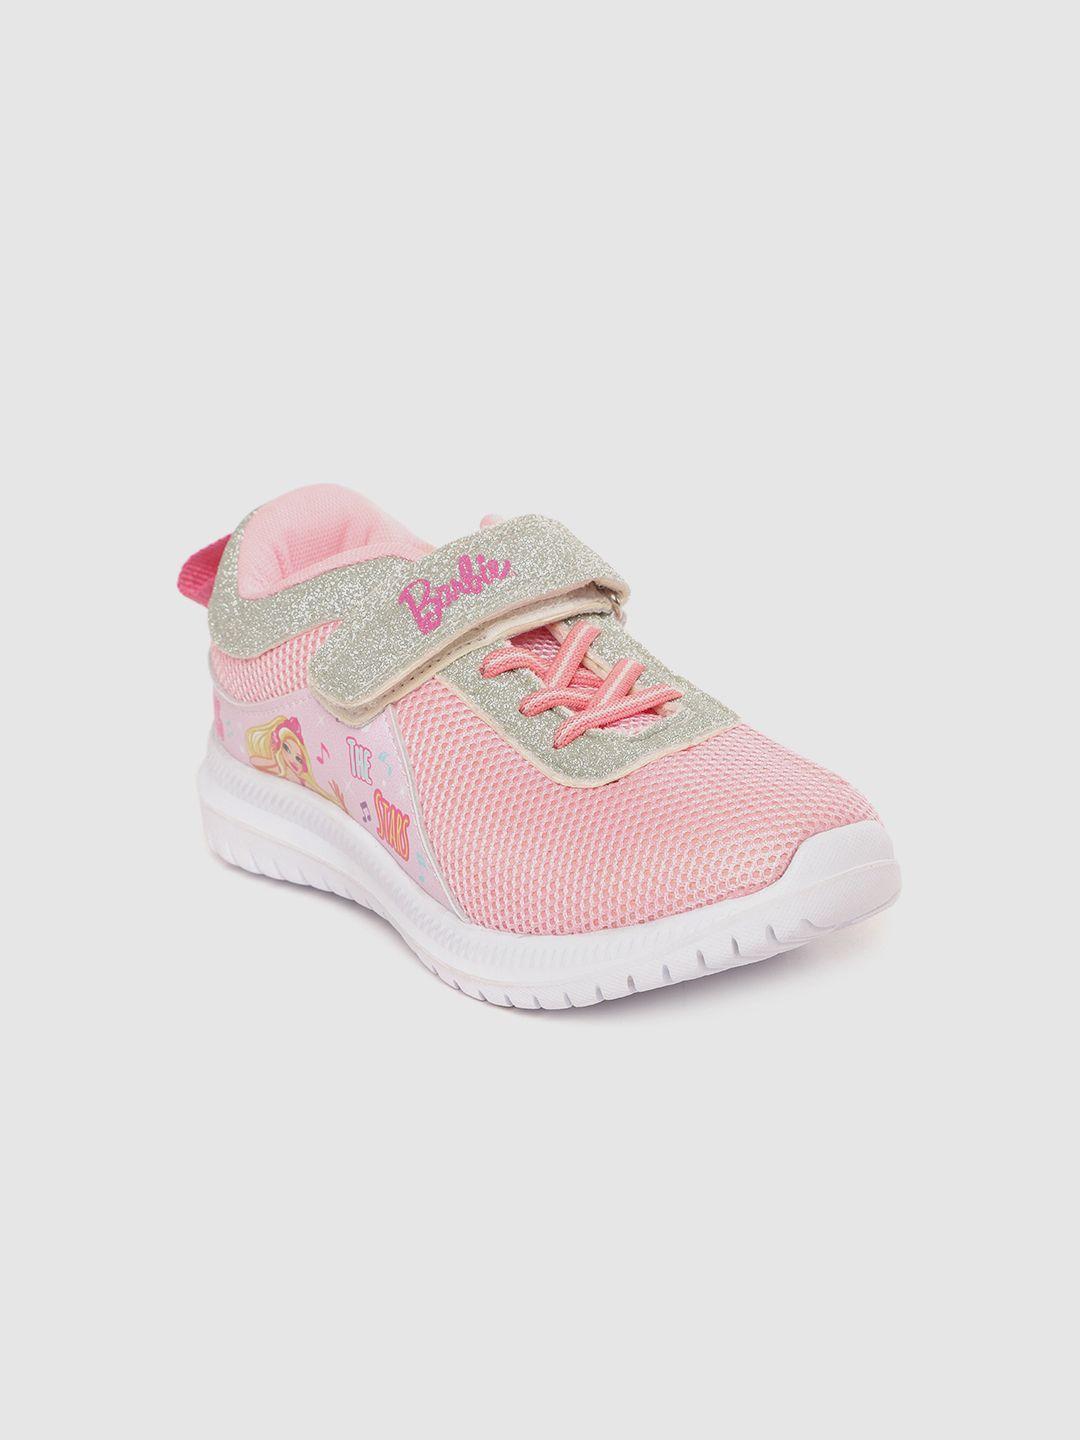 toothless Girls Pink & Silver-Toned Woven Design Barbie Print Running Shoes